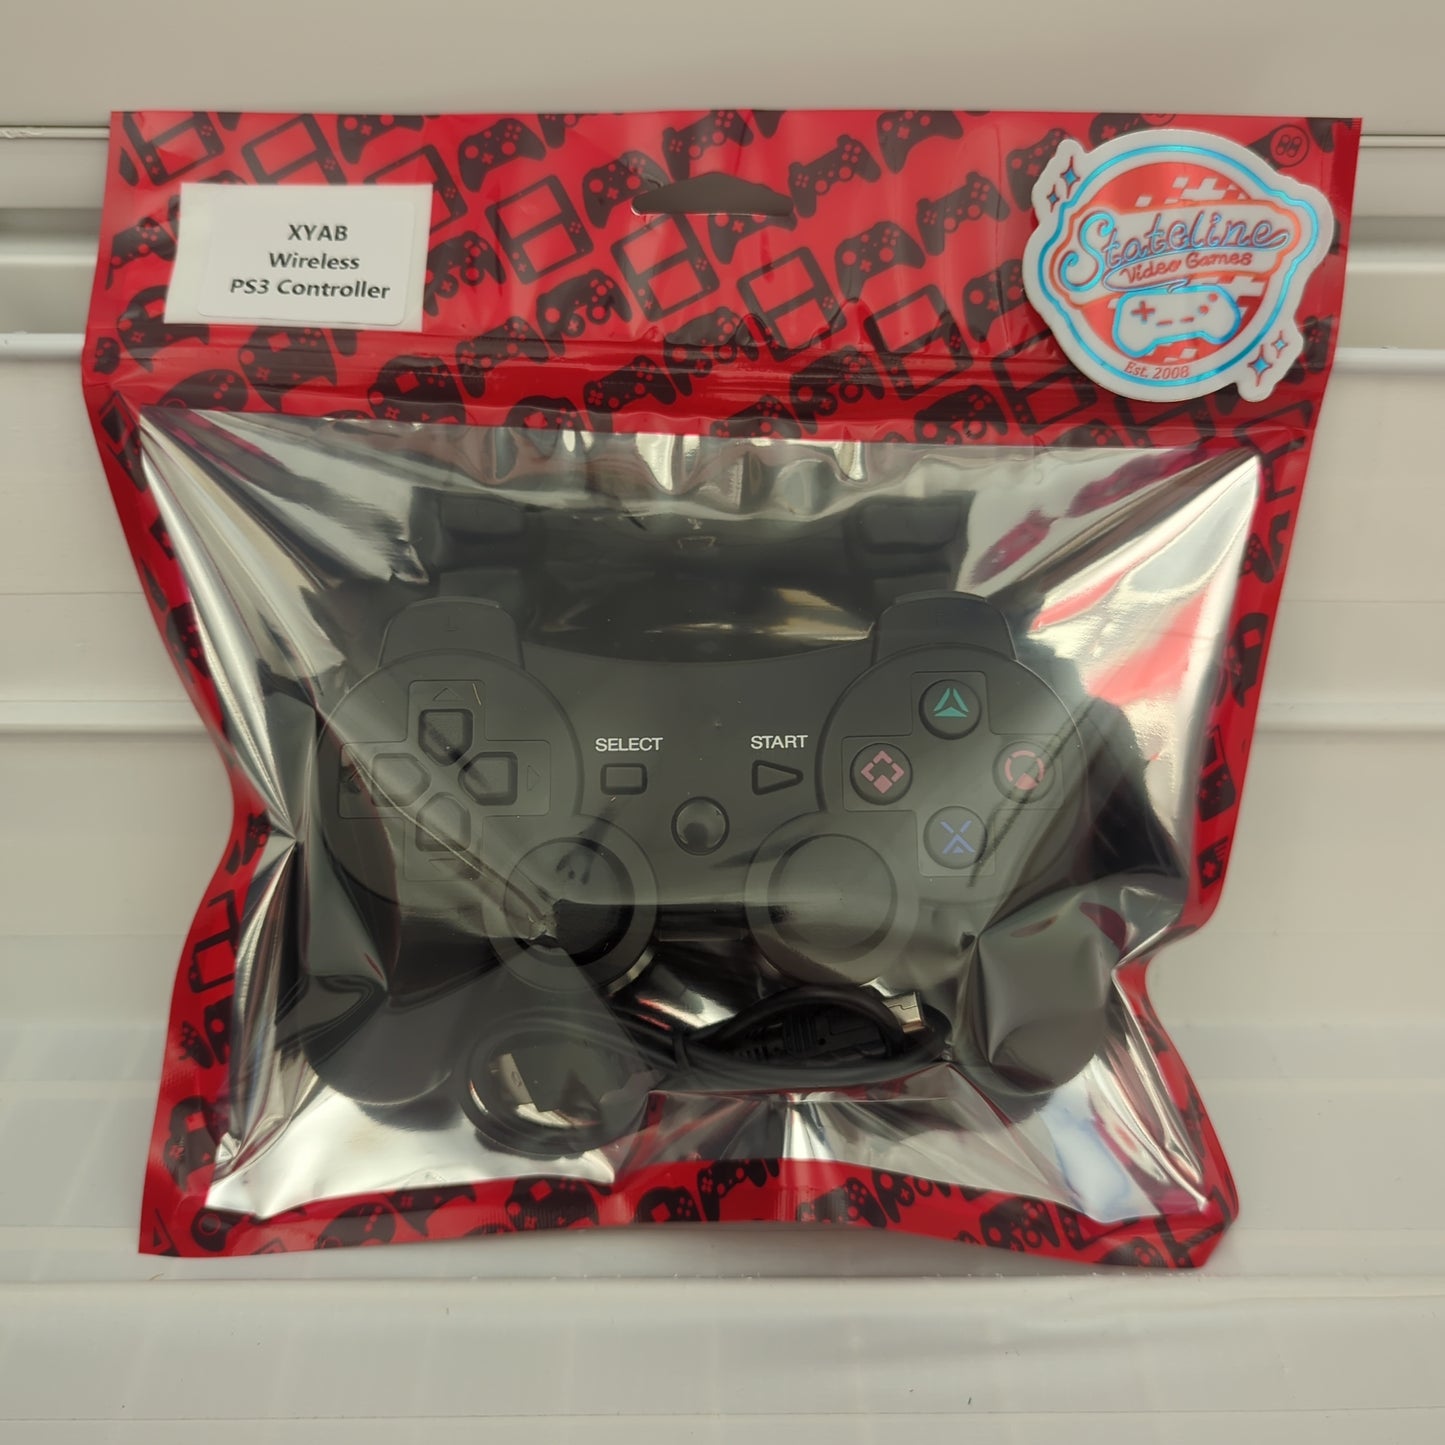 XYAB PS3 Controller - Playstation 3